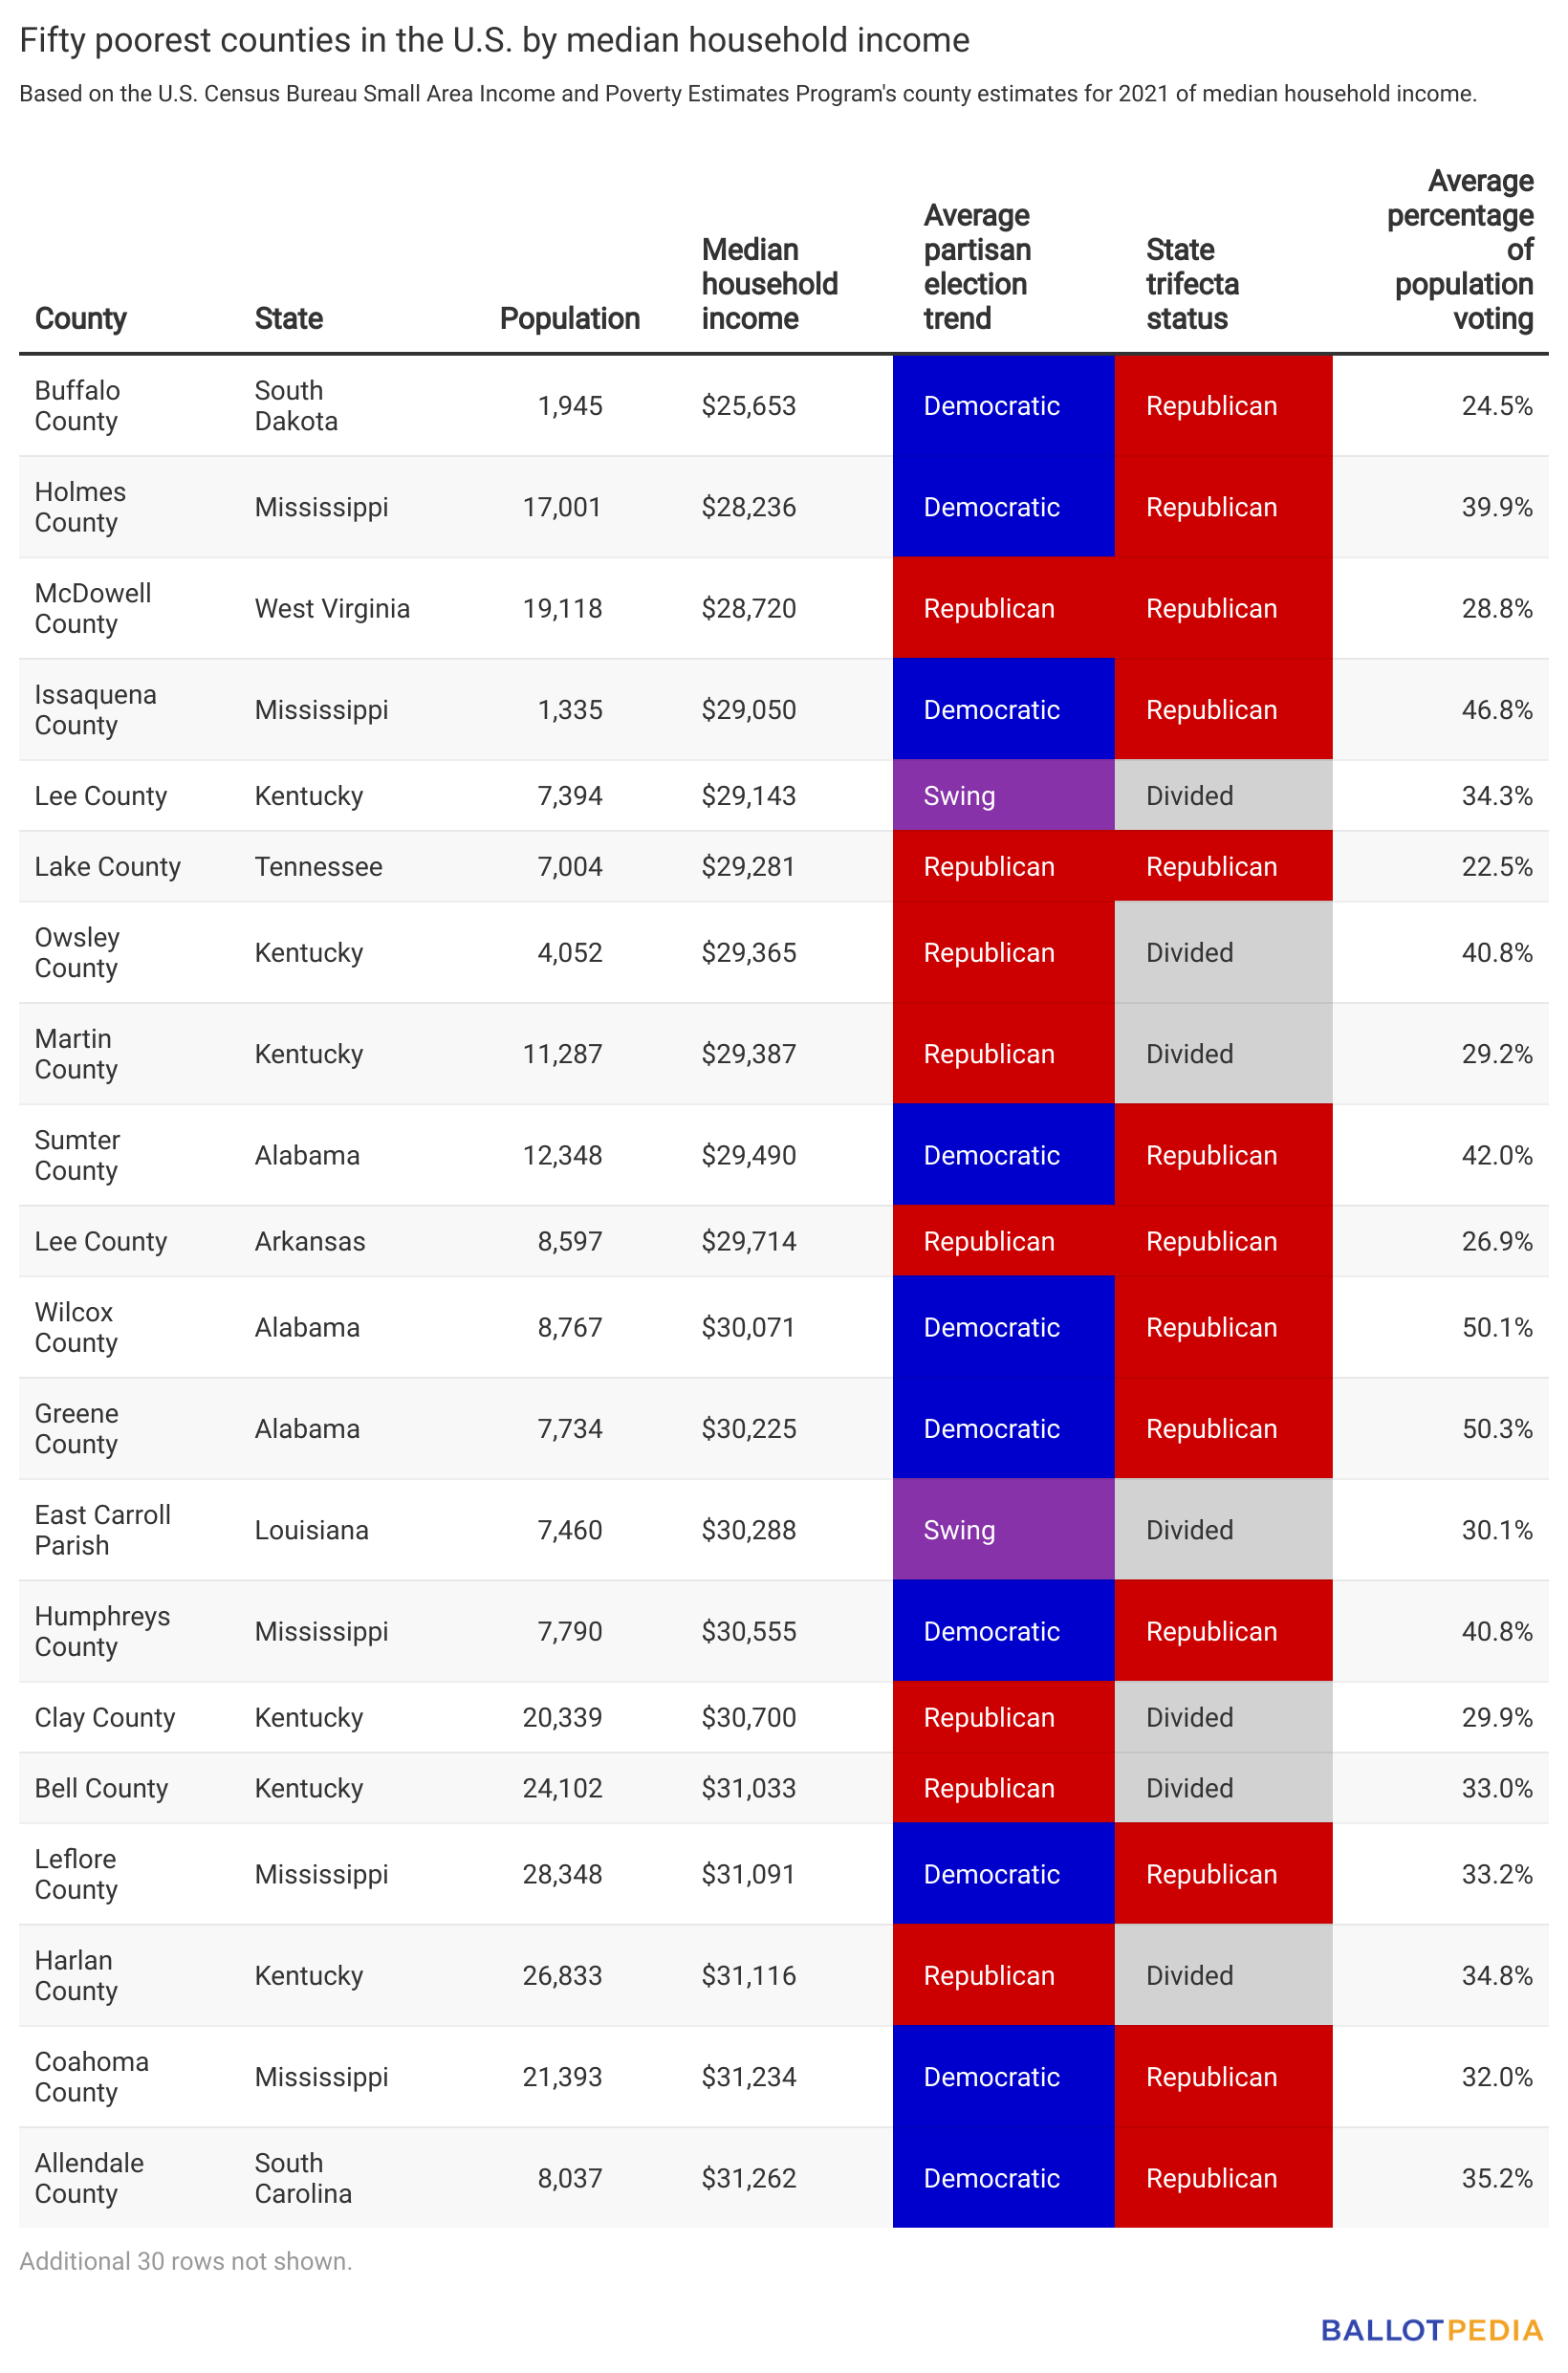 Table showing fifty poorest counties in the U.S. by median household income.